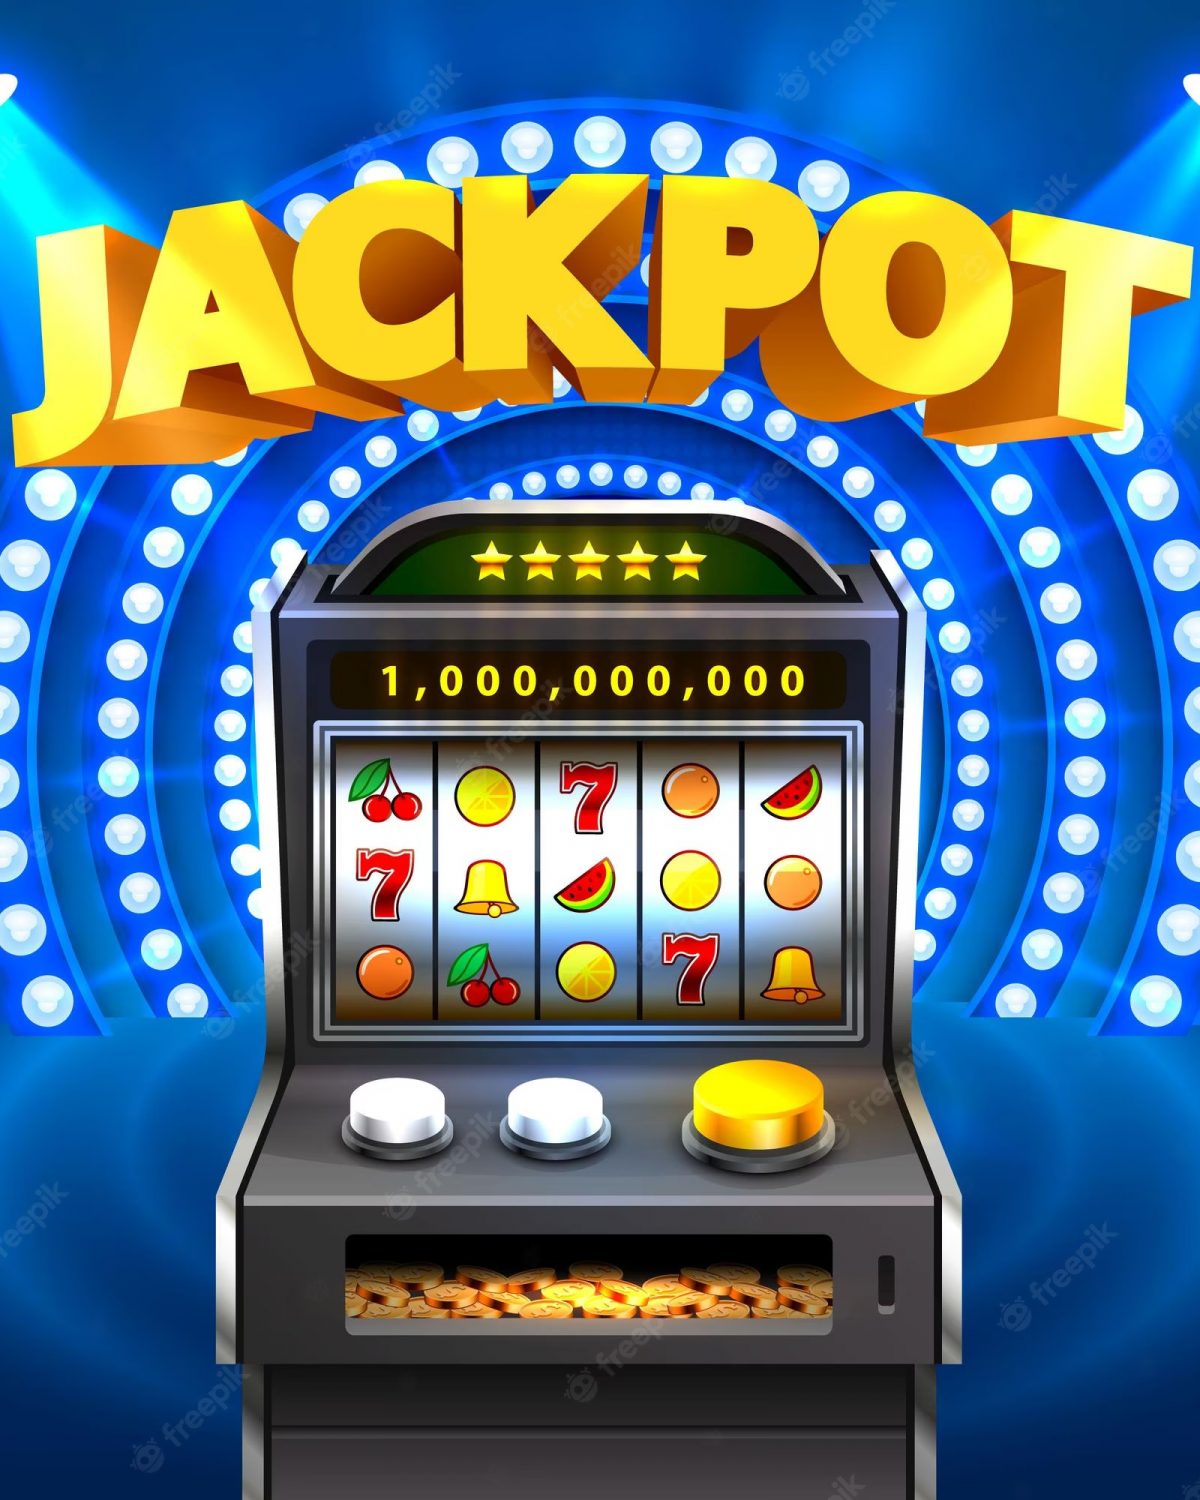 golden-slot-machine-wins-the-jackpot-isolated-on-red-background-vector-illustration_3482-4339